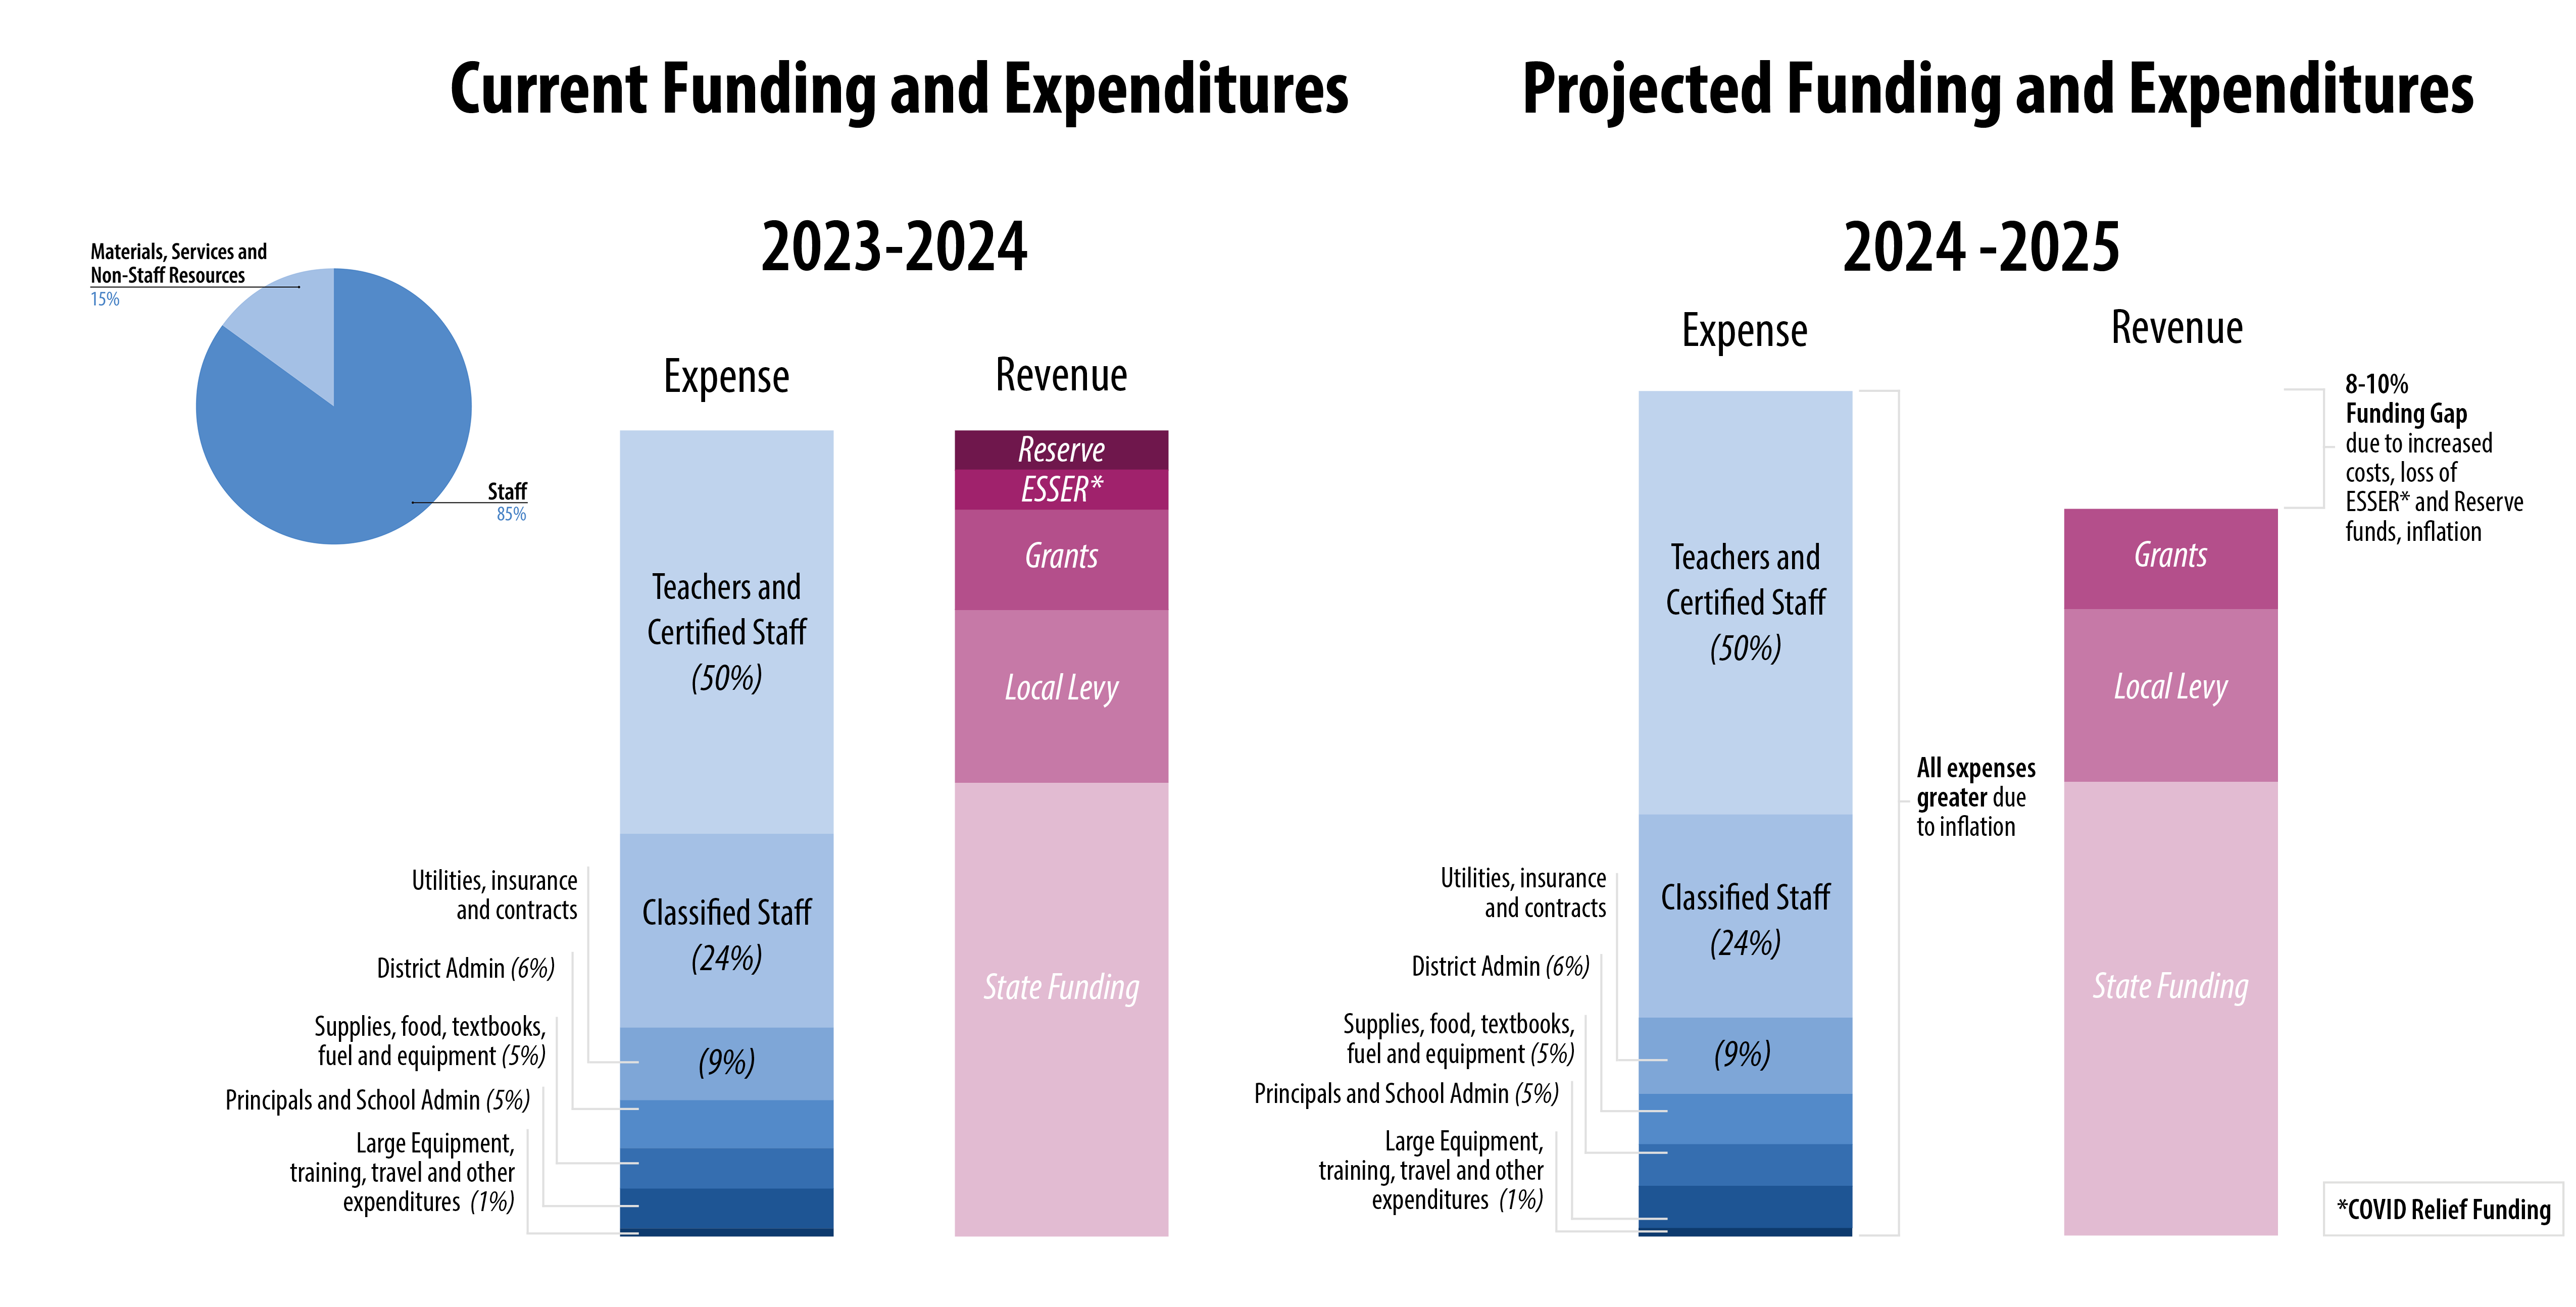 Current funding and expenditures vs Projected Funding and Expenditures